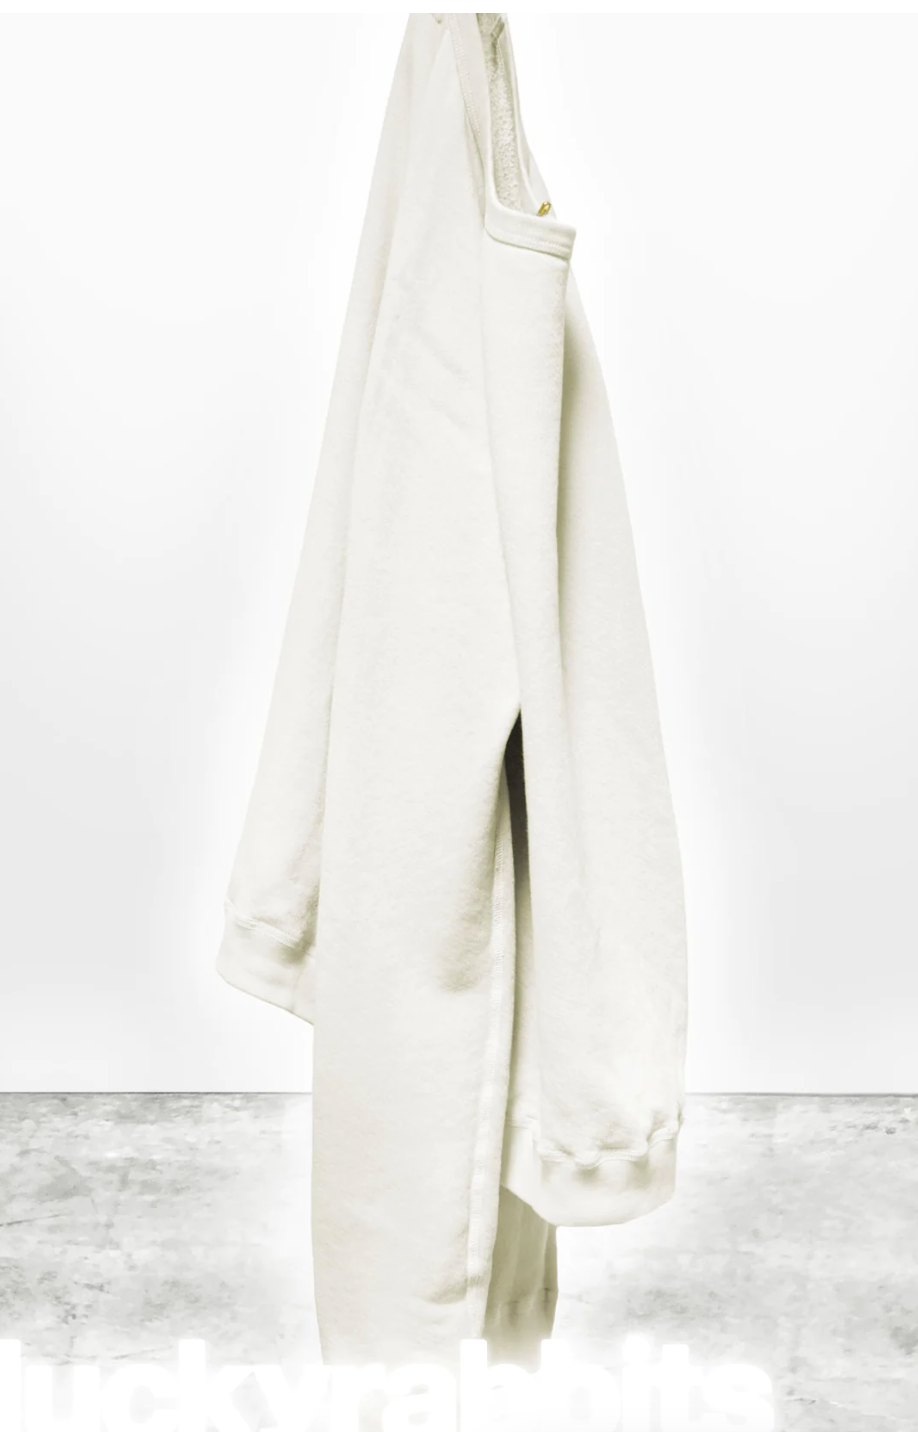 A pair of cream-colored, oversized Lucky Rabbits sweatpants hanging from a hook in a bungalow in Scottsdale, Arizona against a white wall with a gray concrete floor, displaying the text "lucky rabbits" near the bottom. Brand: Free City (sparrow, LLC)